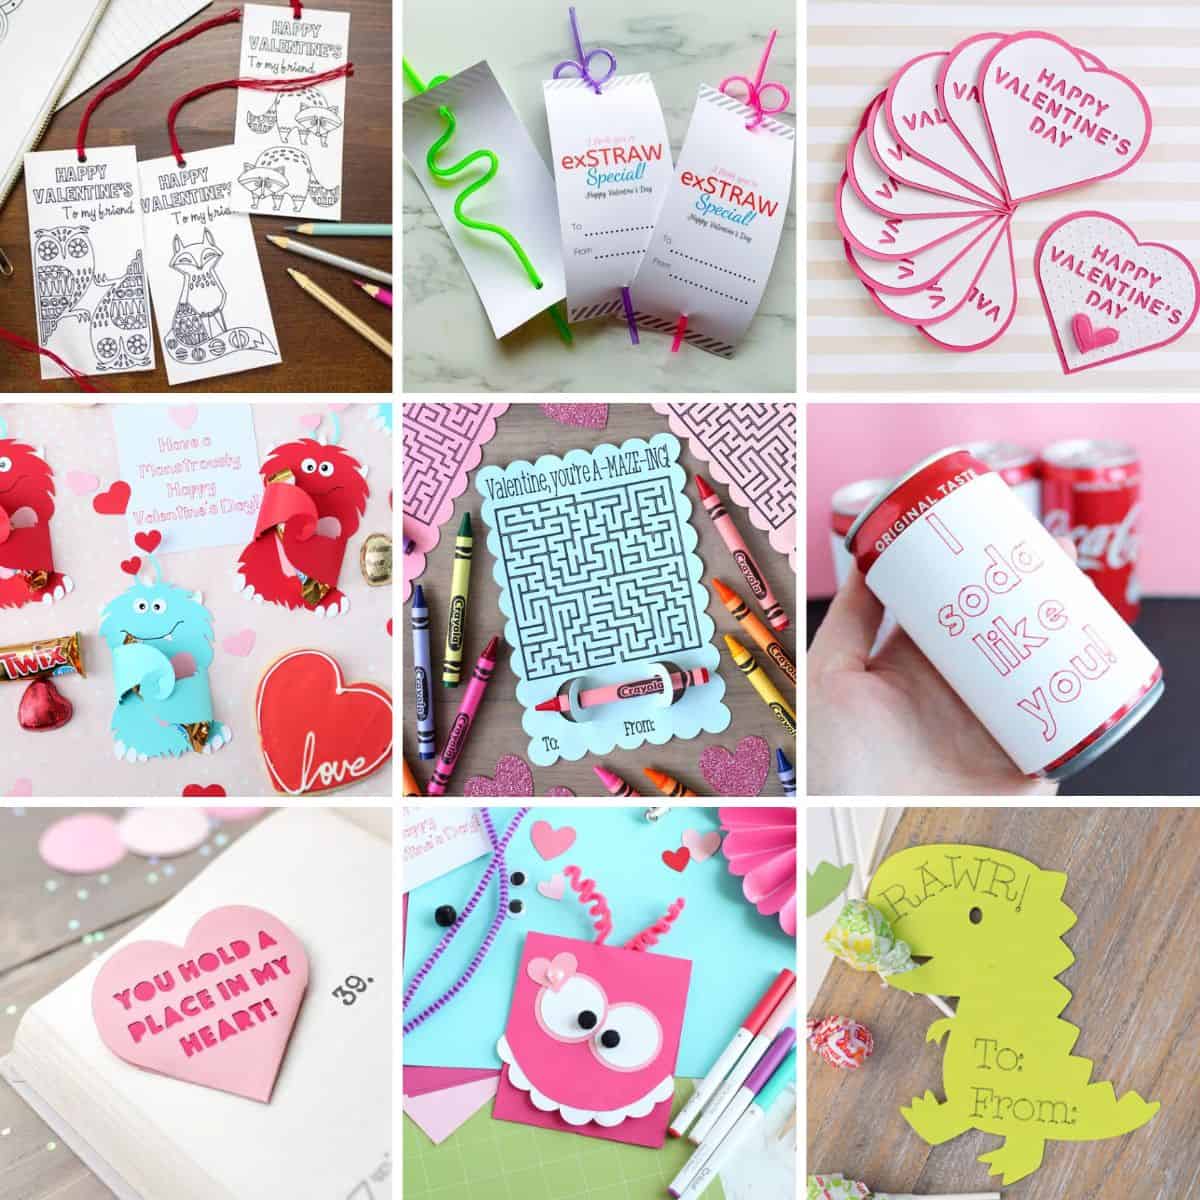 23 Classroom Valentine Cards You Can Make with Cricut - The Crafty Blog  Stalker